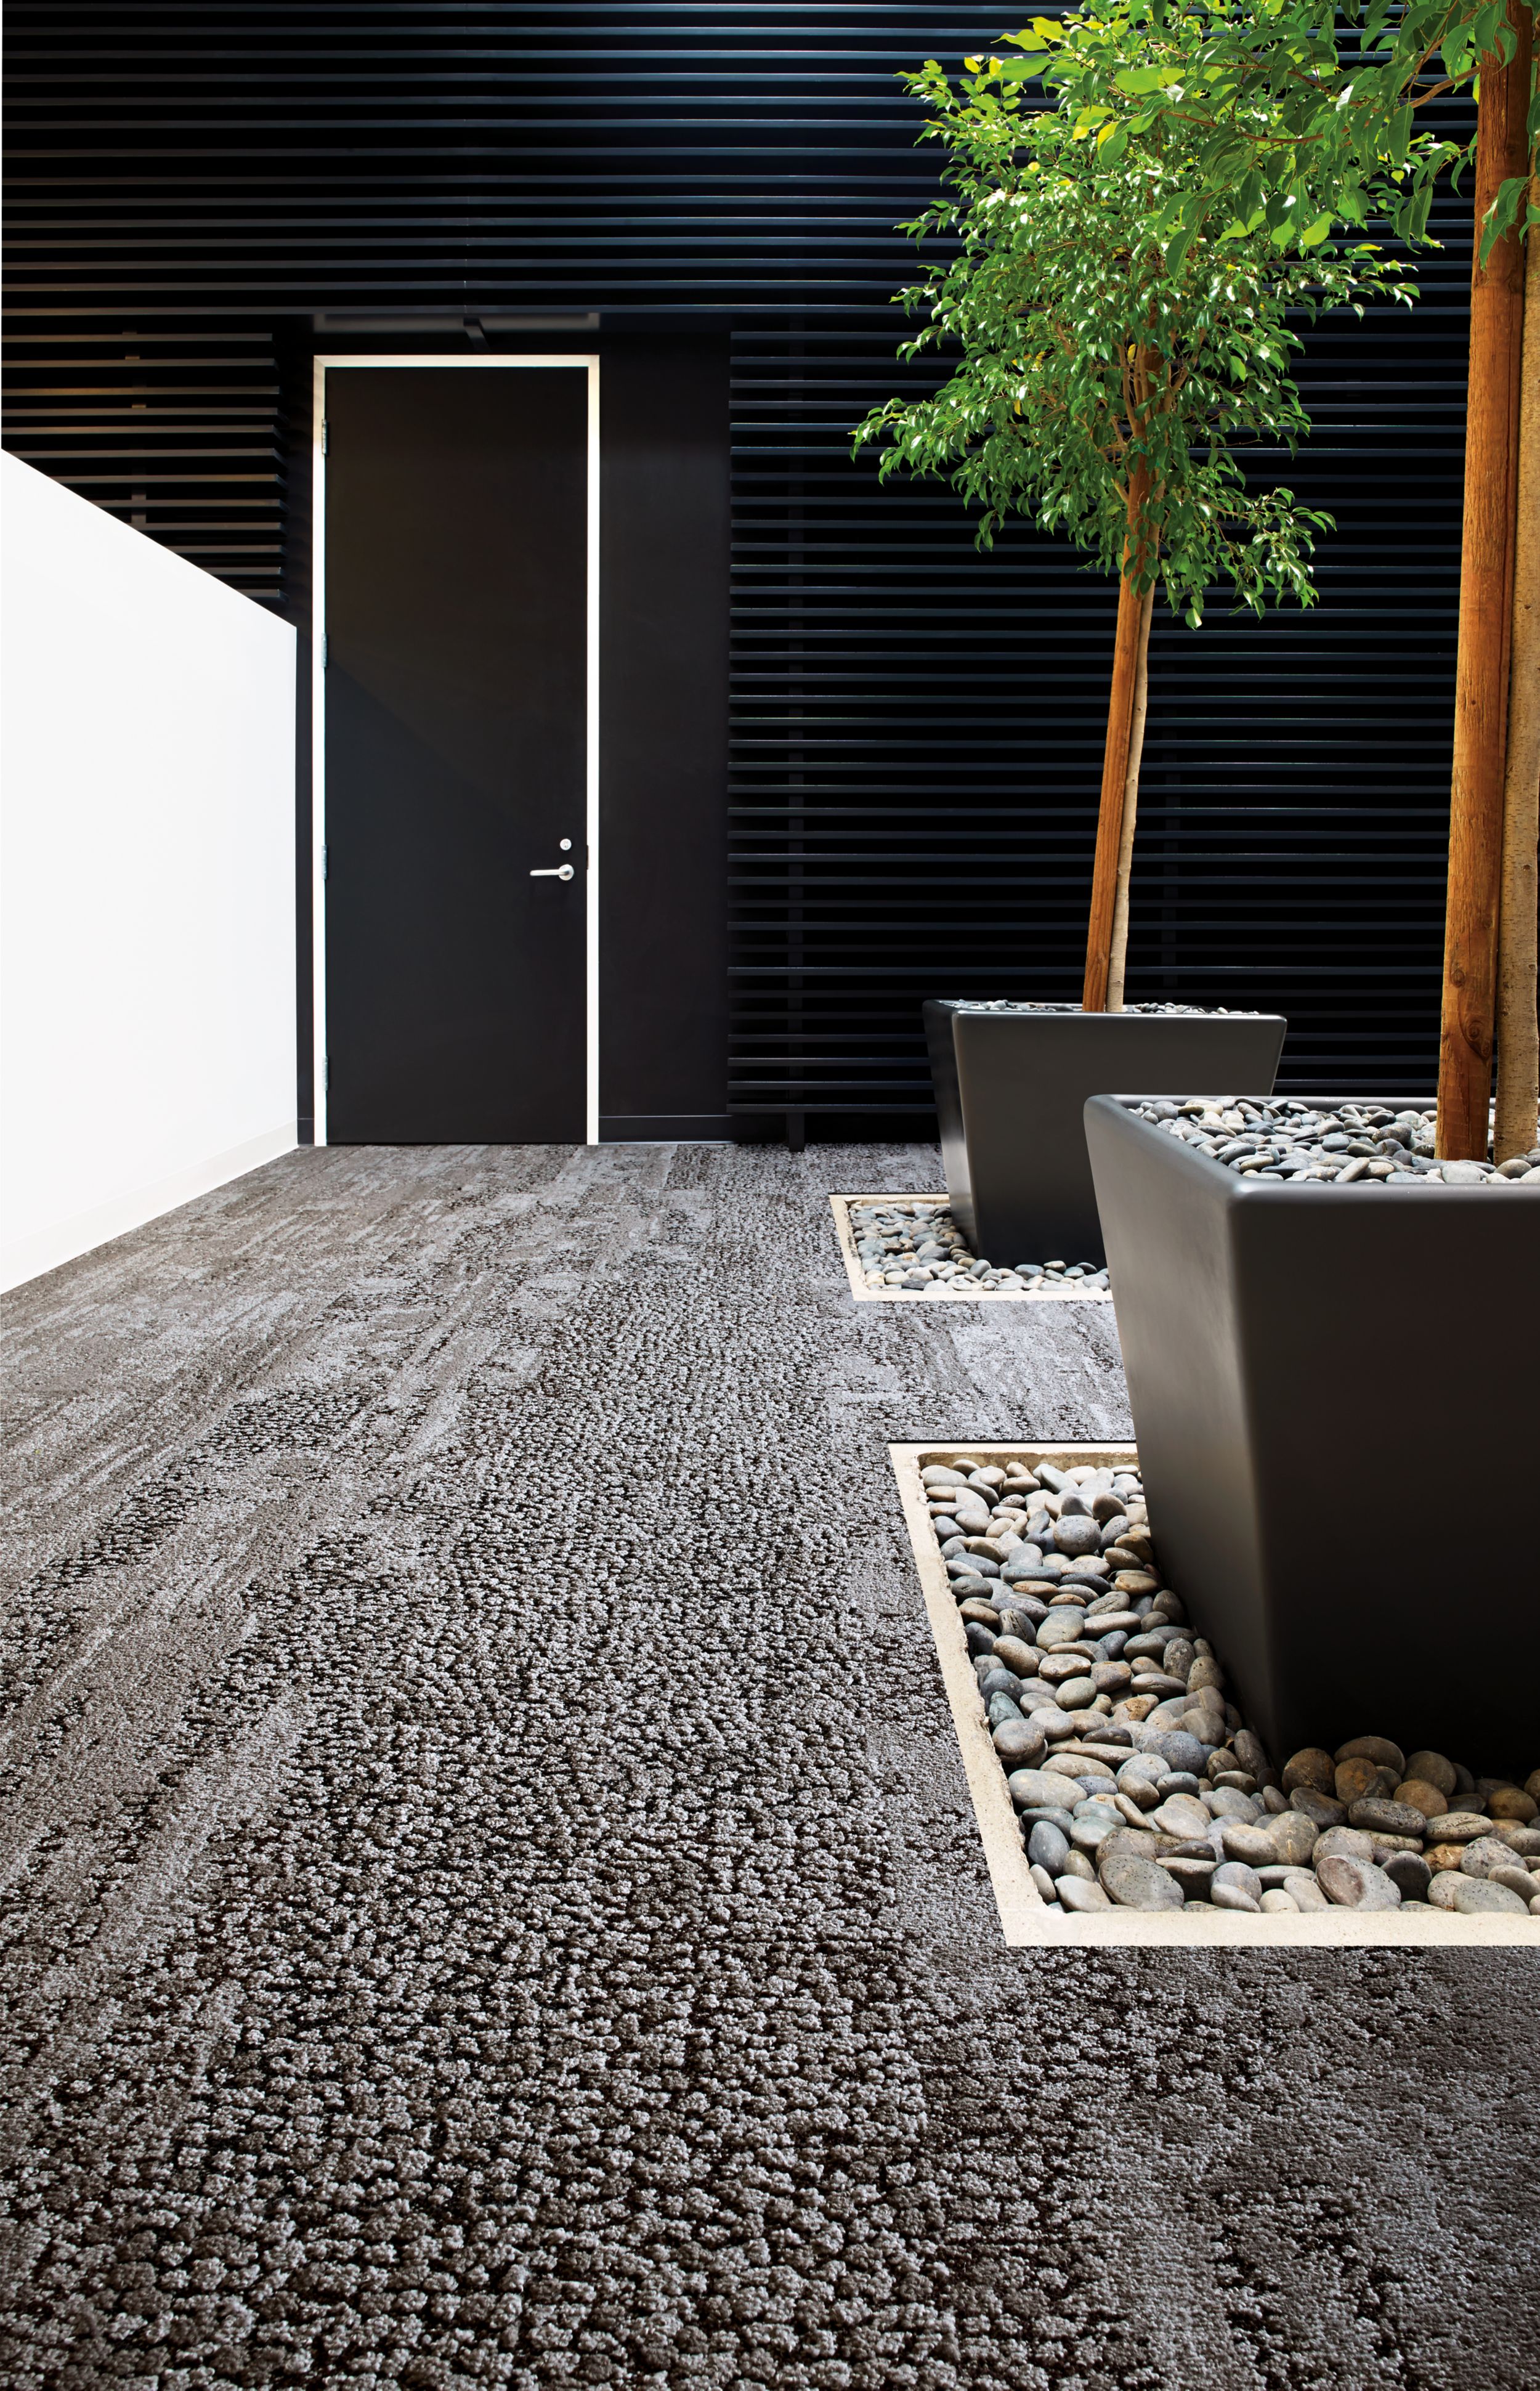 Interface HN810, HN820, HN840 and HN850 plank carpet tiles in white anc black room with potted trees and river rock número de imagen 8